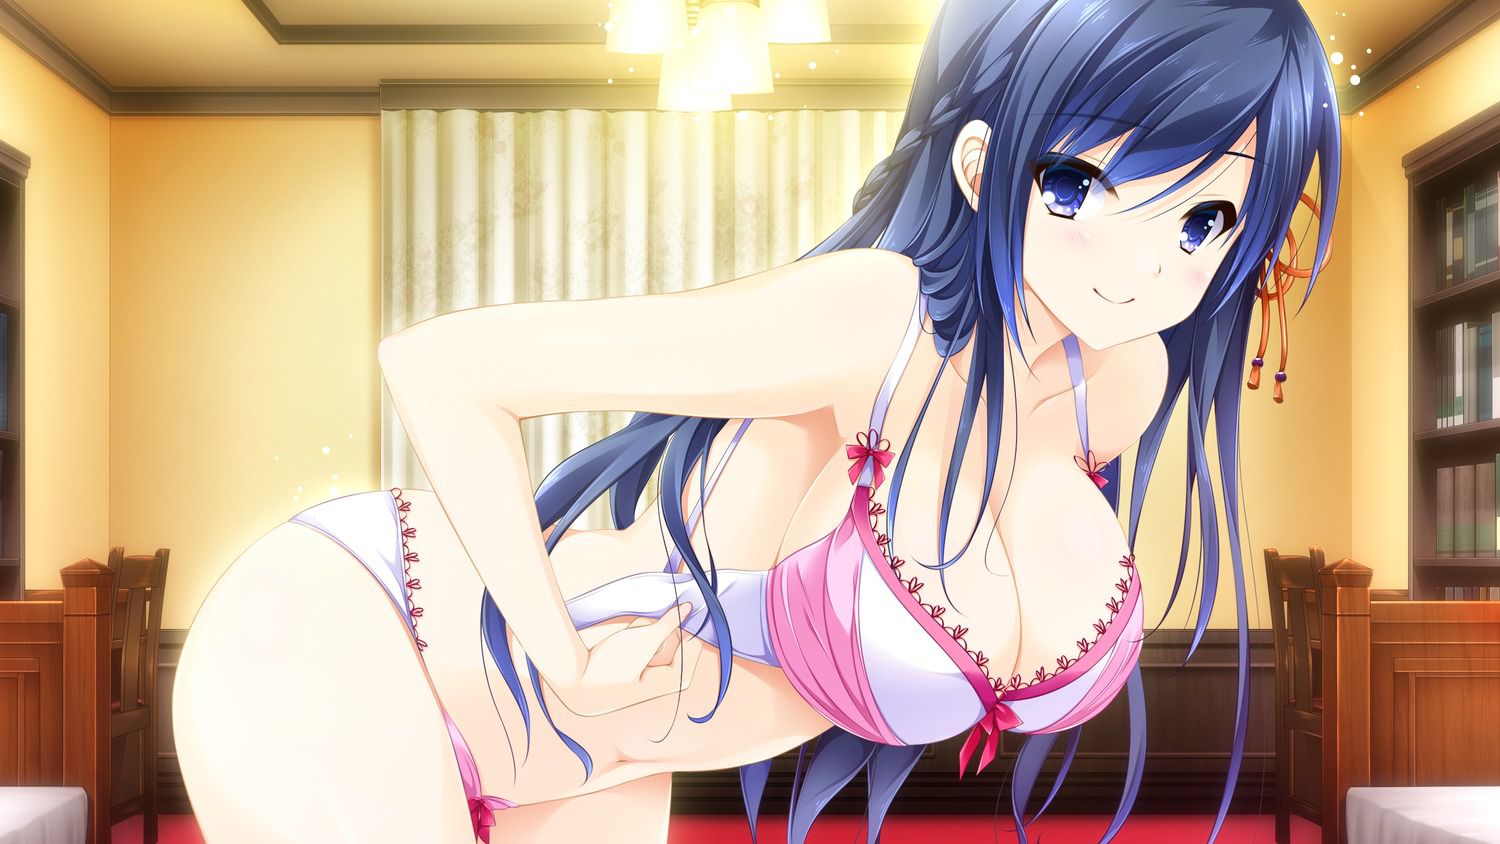 Essence of love decorate the maiden [18 eroge HCG] erotic pictures 1